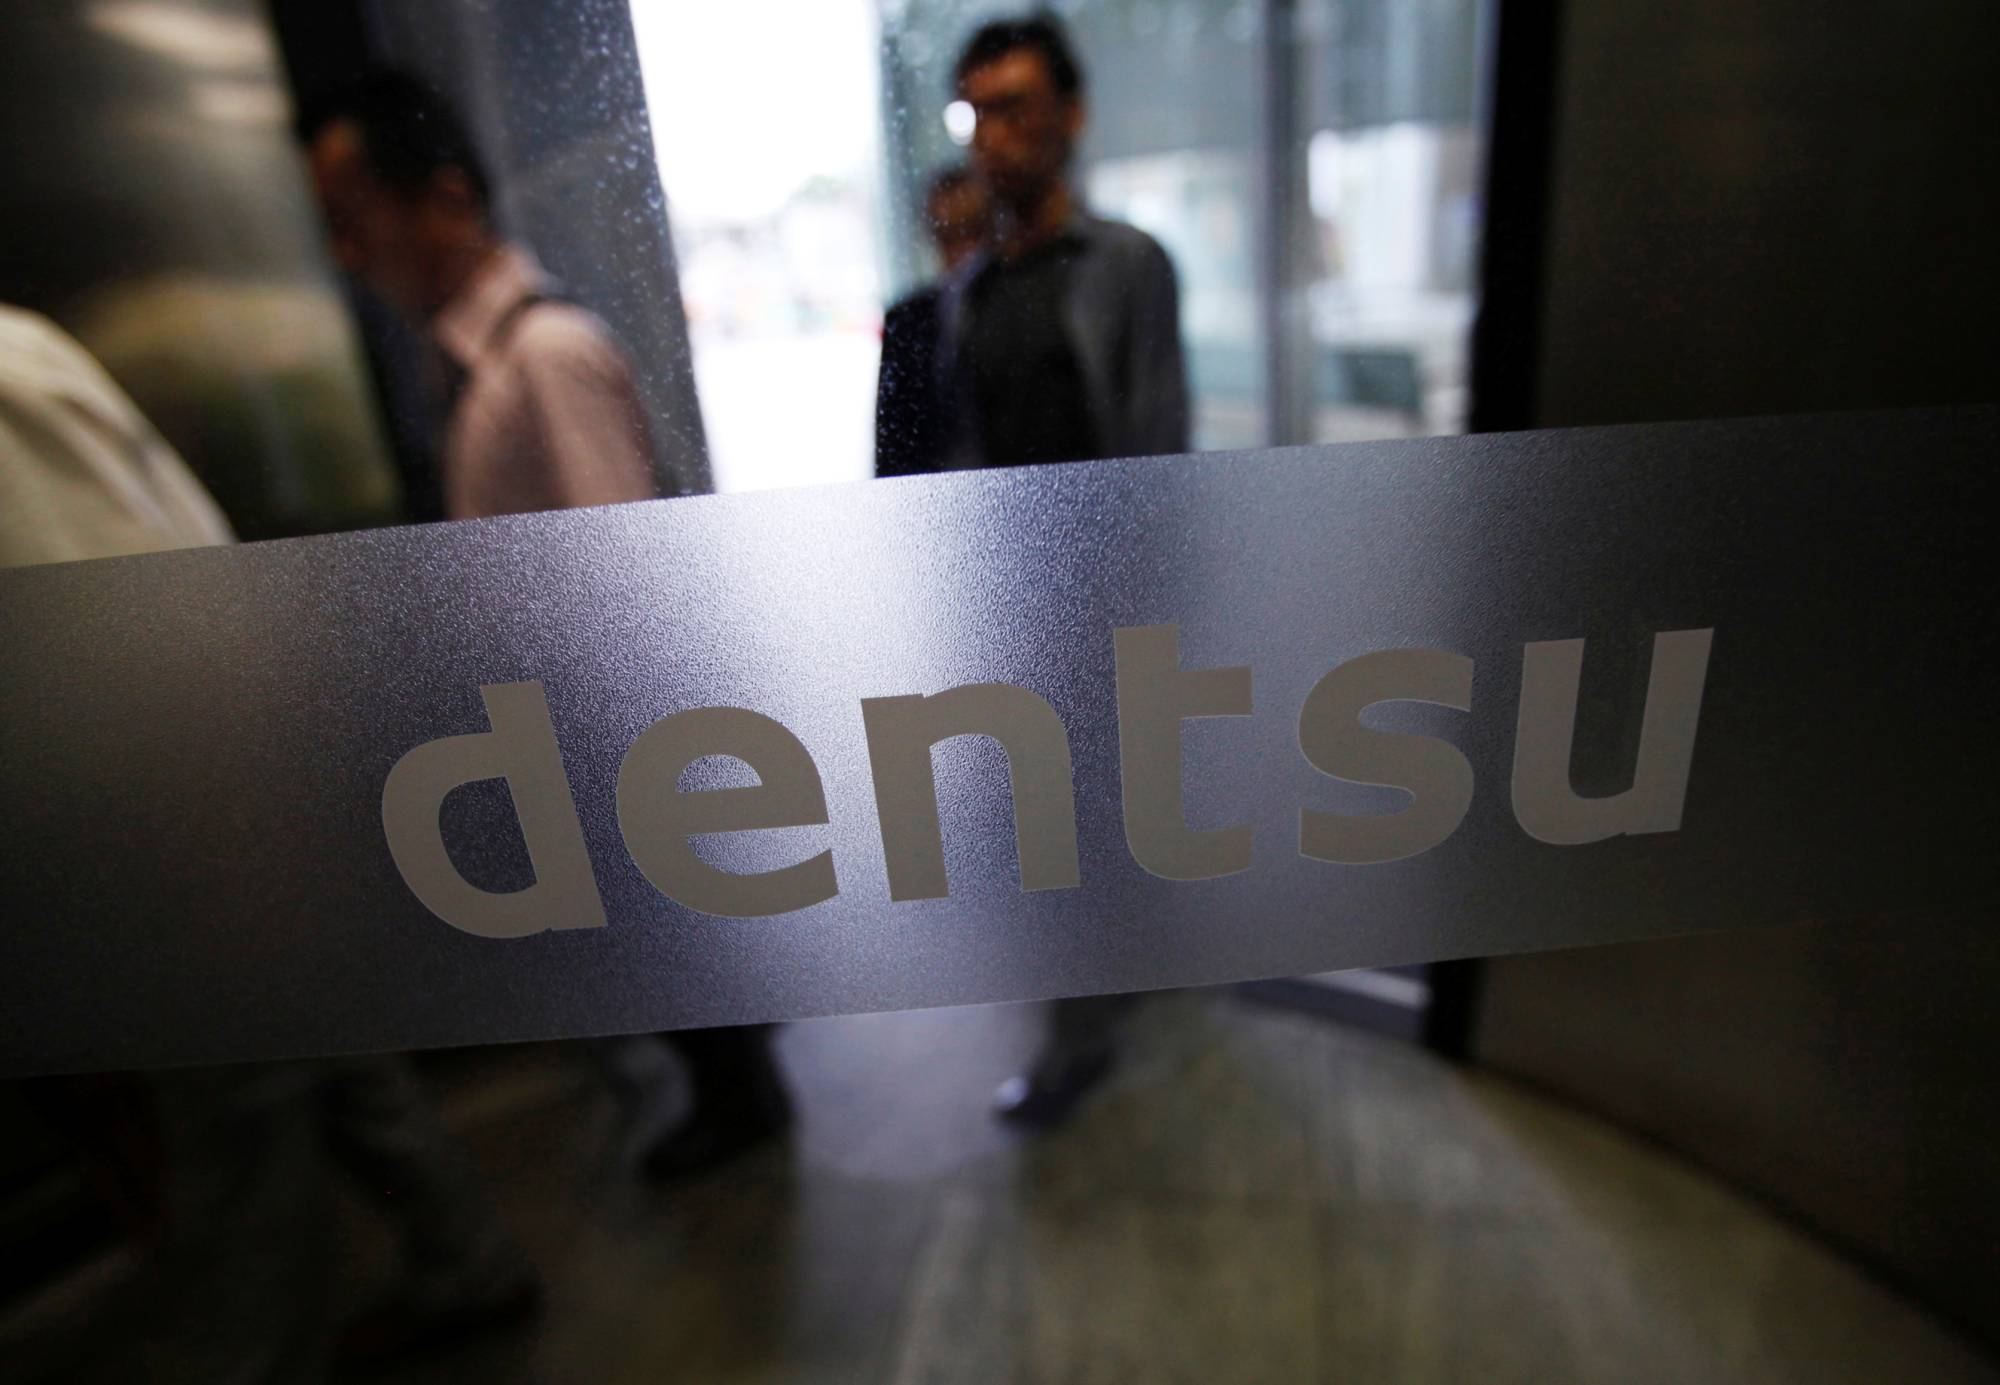 Several officials with Japanese ad giant Dentsu have admitted to collusion over bid-rigging for contracts related to test events for the 2020 Tokyo Olympics. | REUTERS